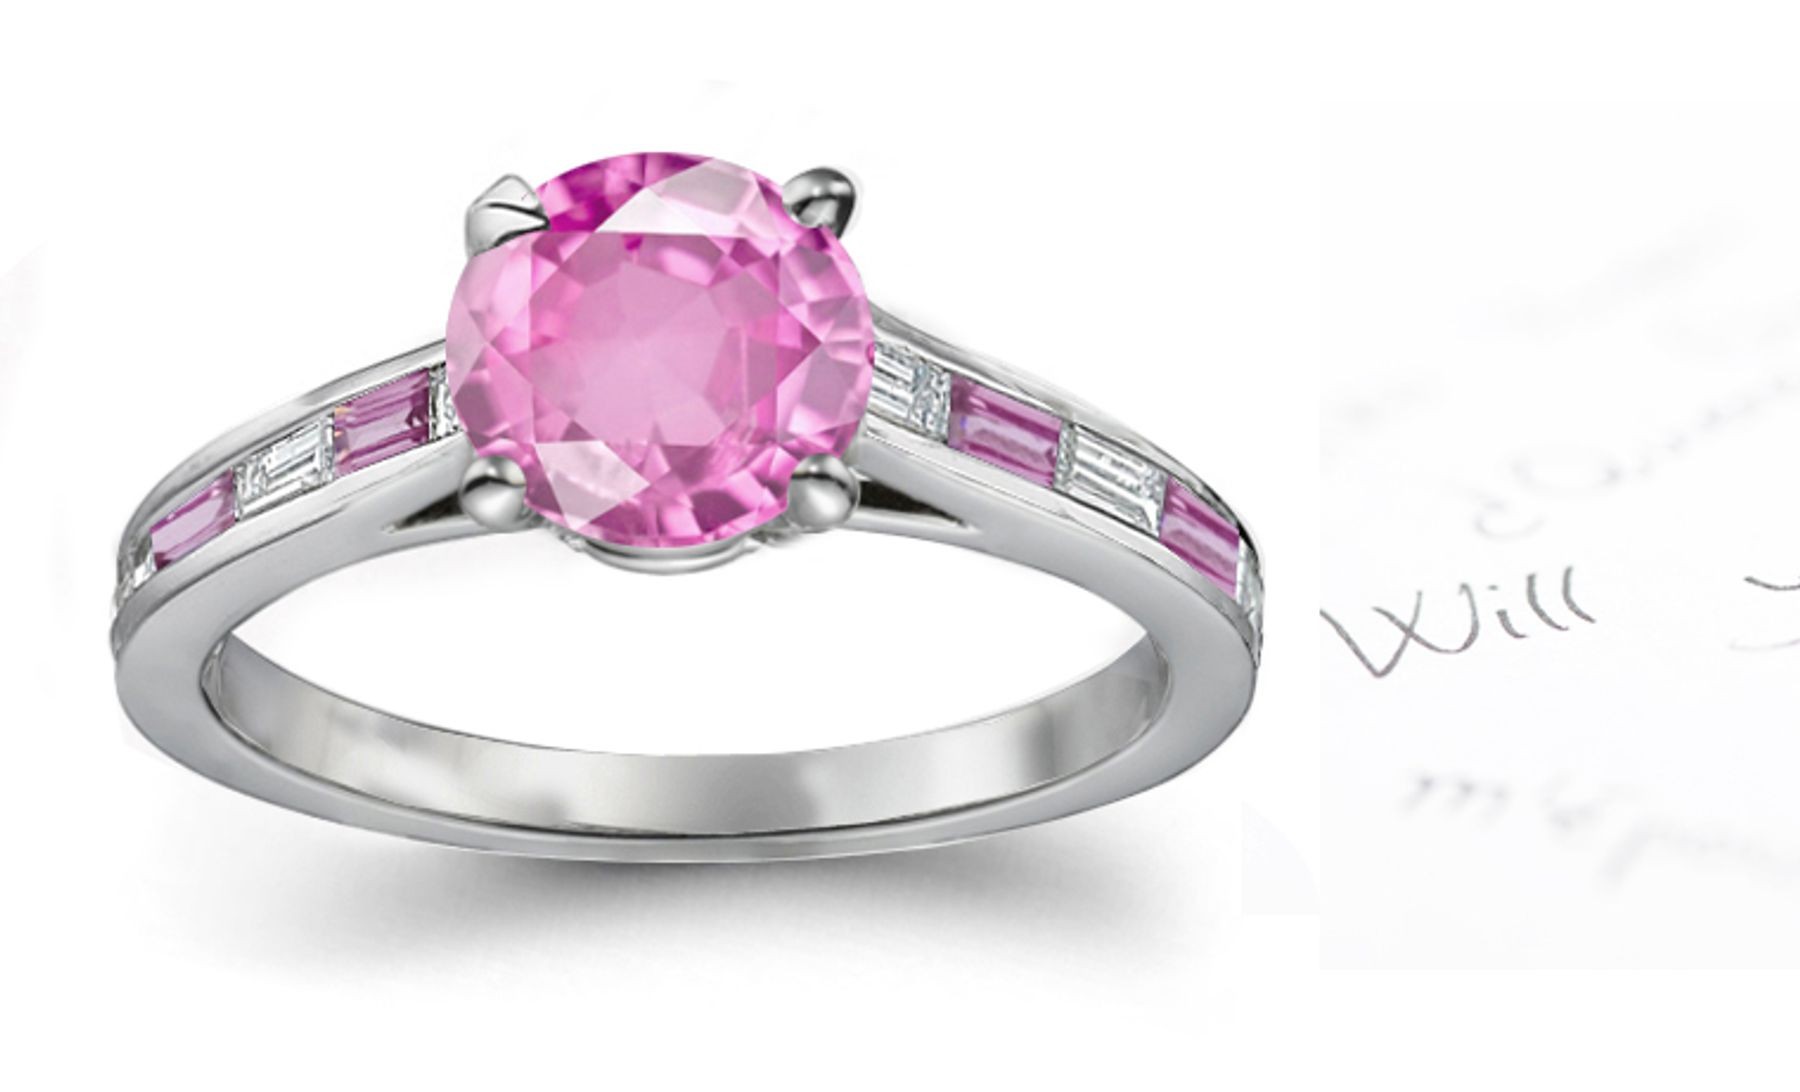 Springs Up: Round Pink Sapphire & Baguette White Diamond Ring in Platinum